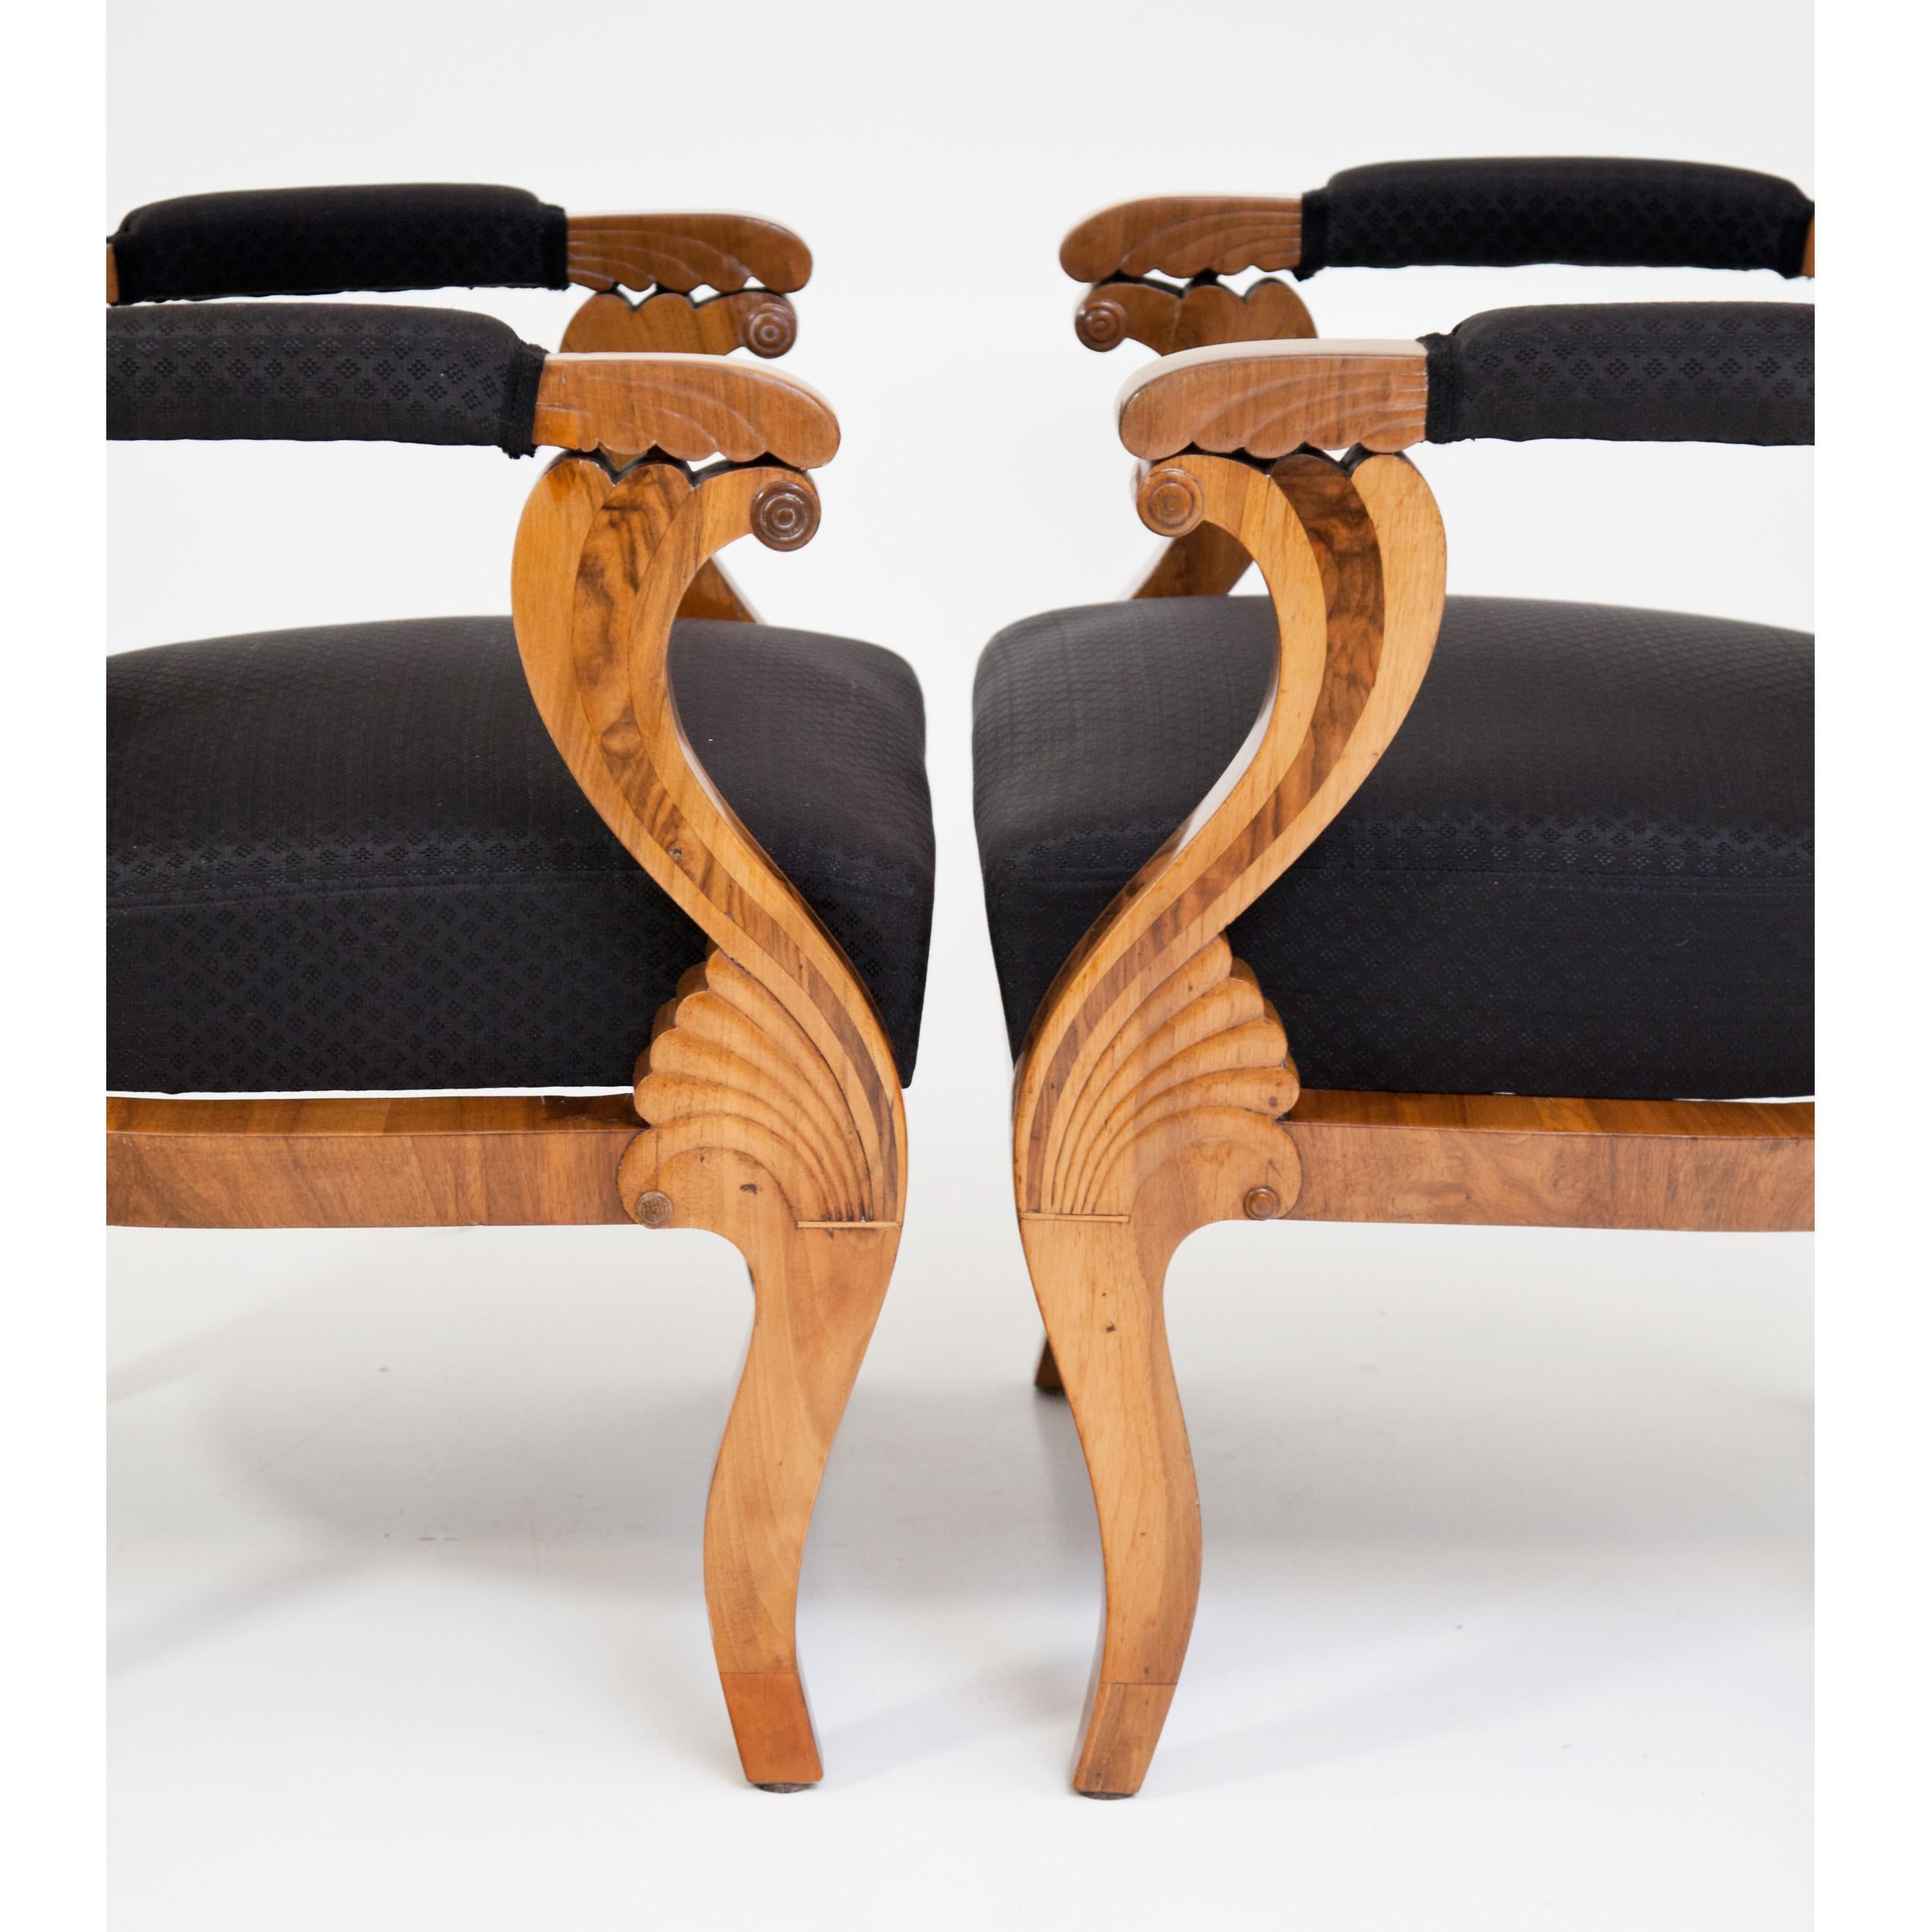 Pair of Biedermeier armchairs with upholstered seats, back- and armrests. These rest on fan-shaped elements, veneered in walnut or walnut root.